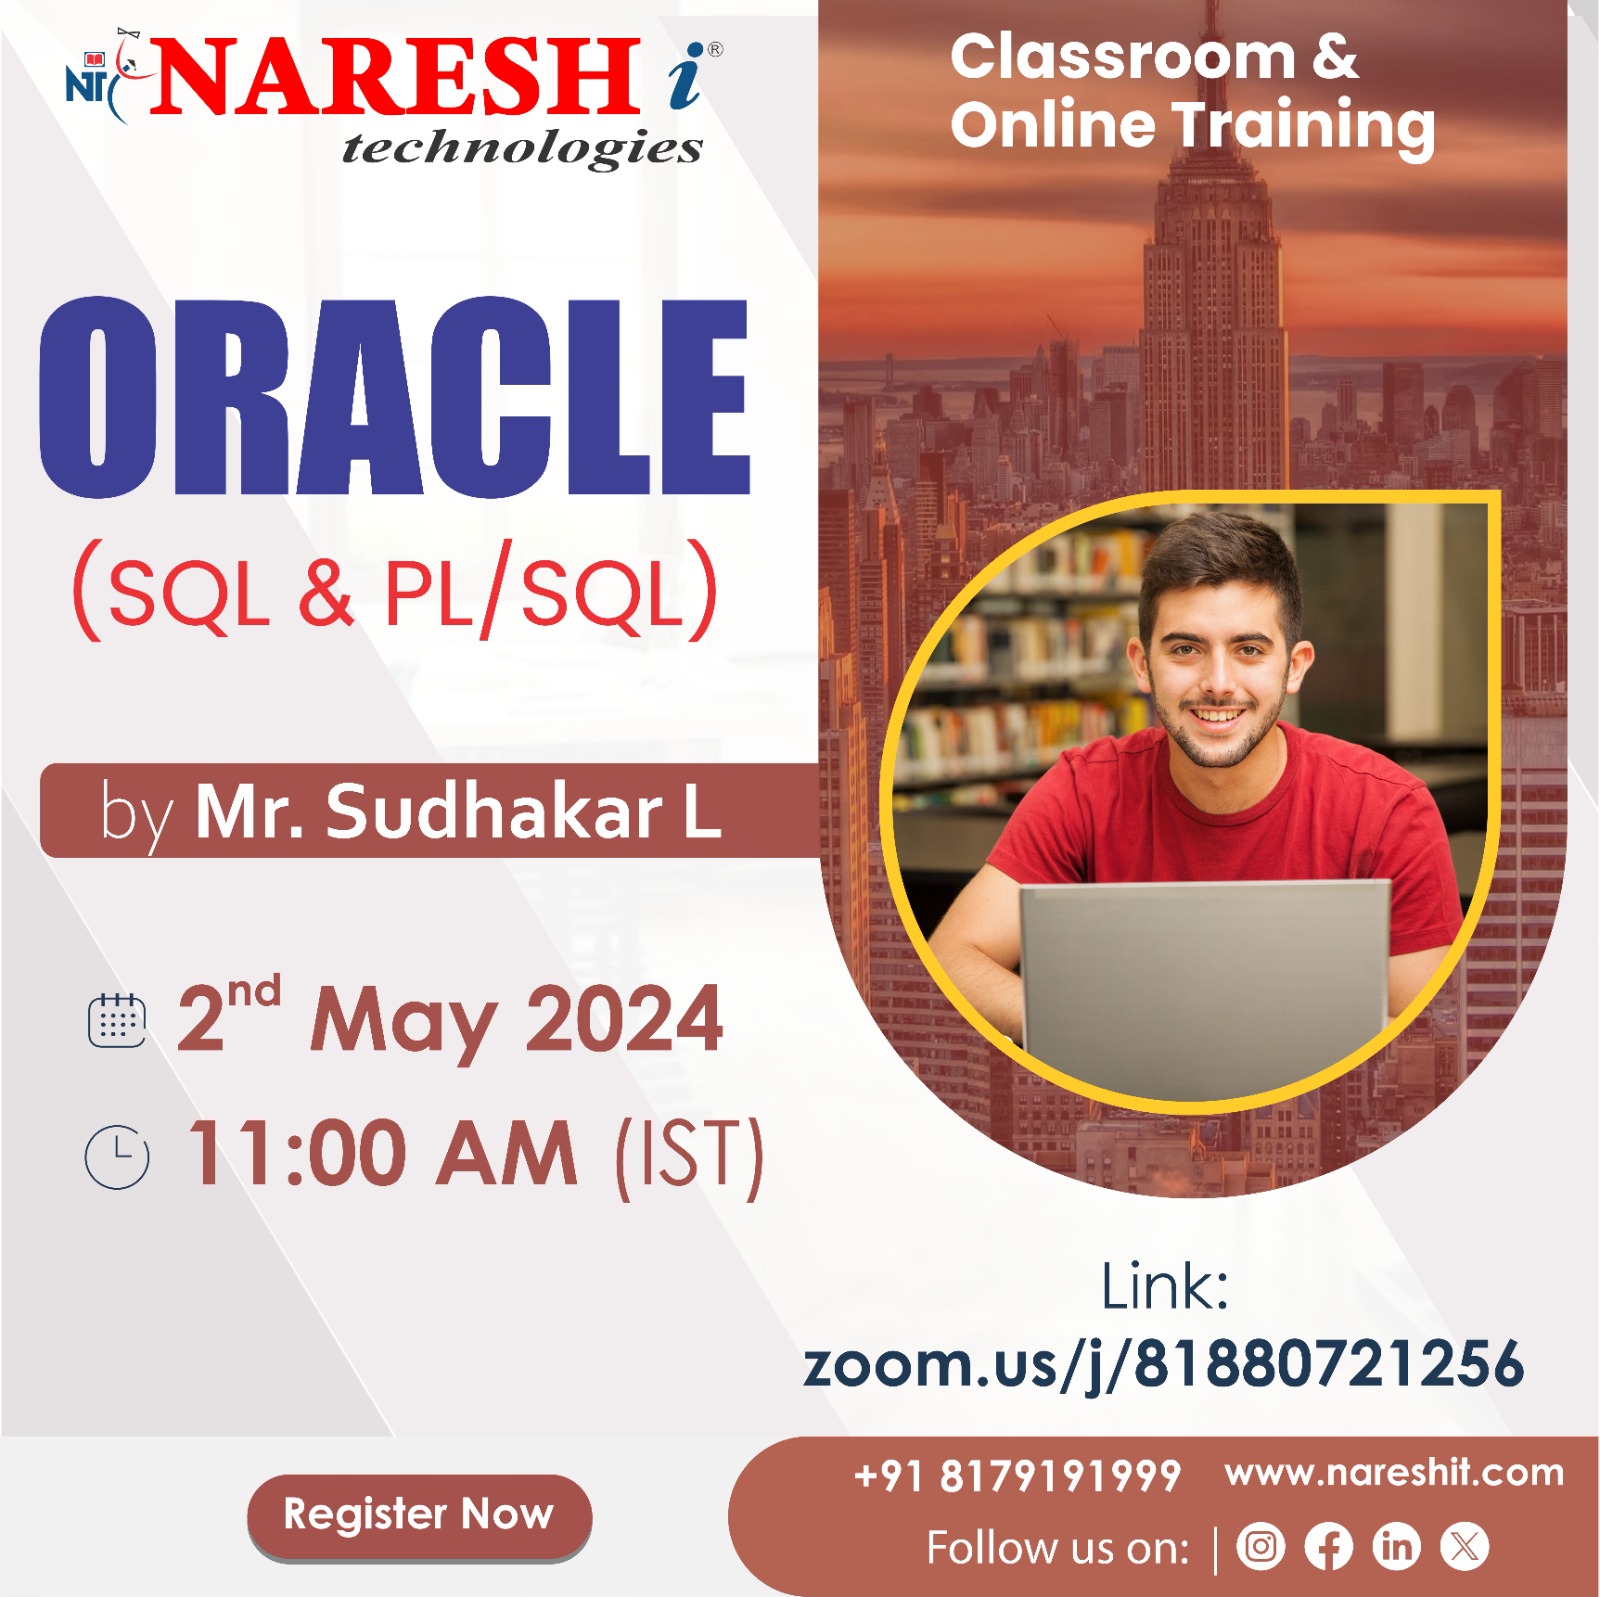 Best Oracle Classroom Training in KPHB - Naresh IT,Hyderabad,Educational & Institute,Computer Courses